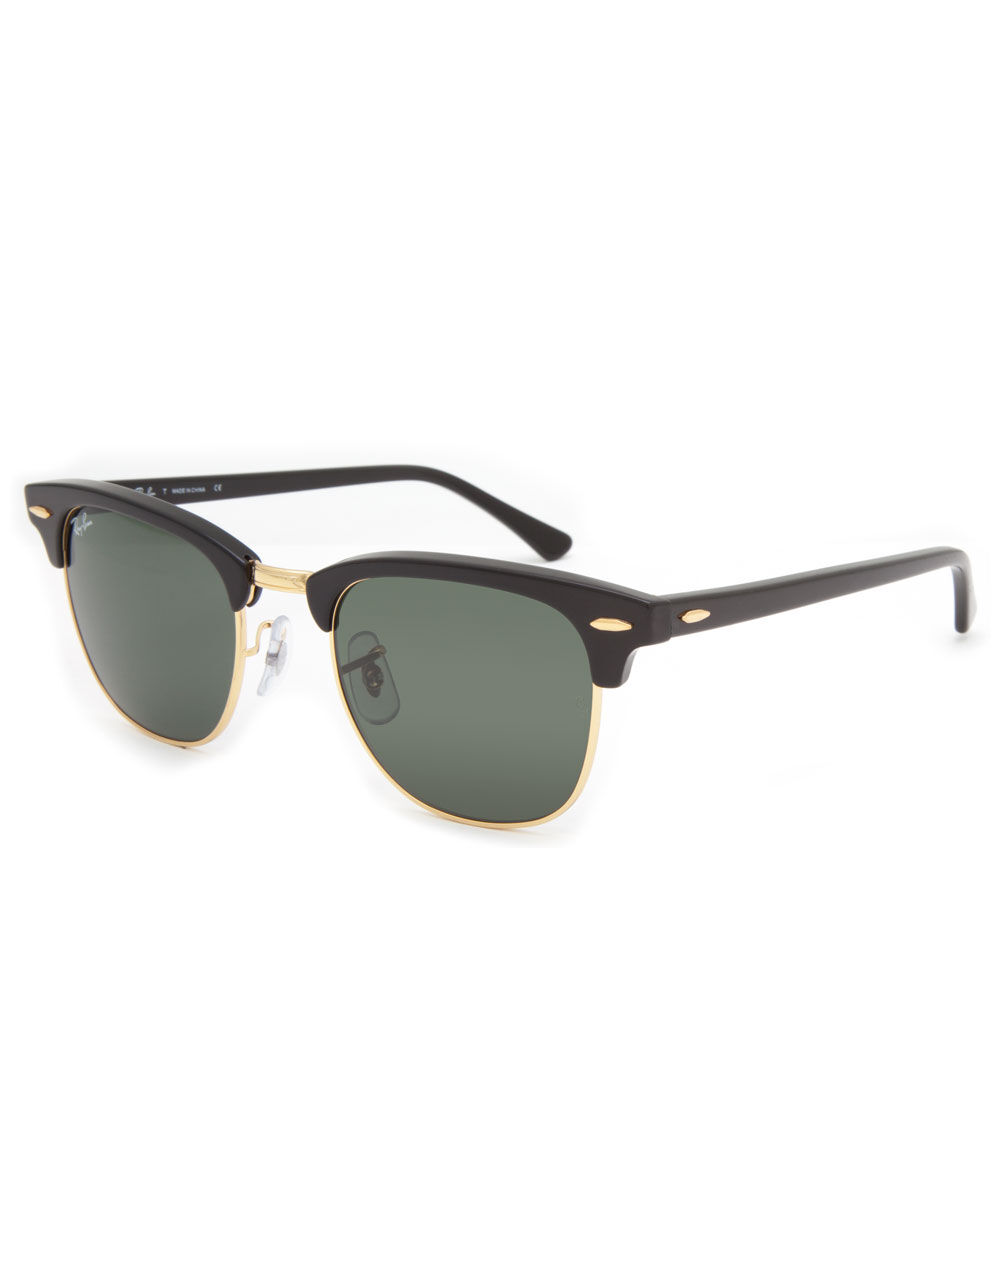 RAY-BAN Clubmaster Sunglasses - BLACK | Tillys